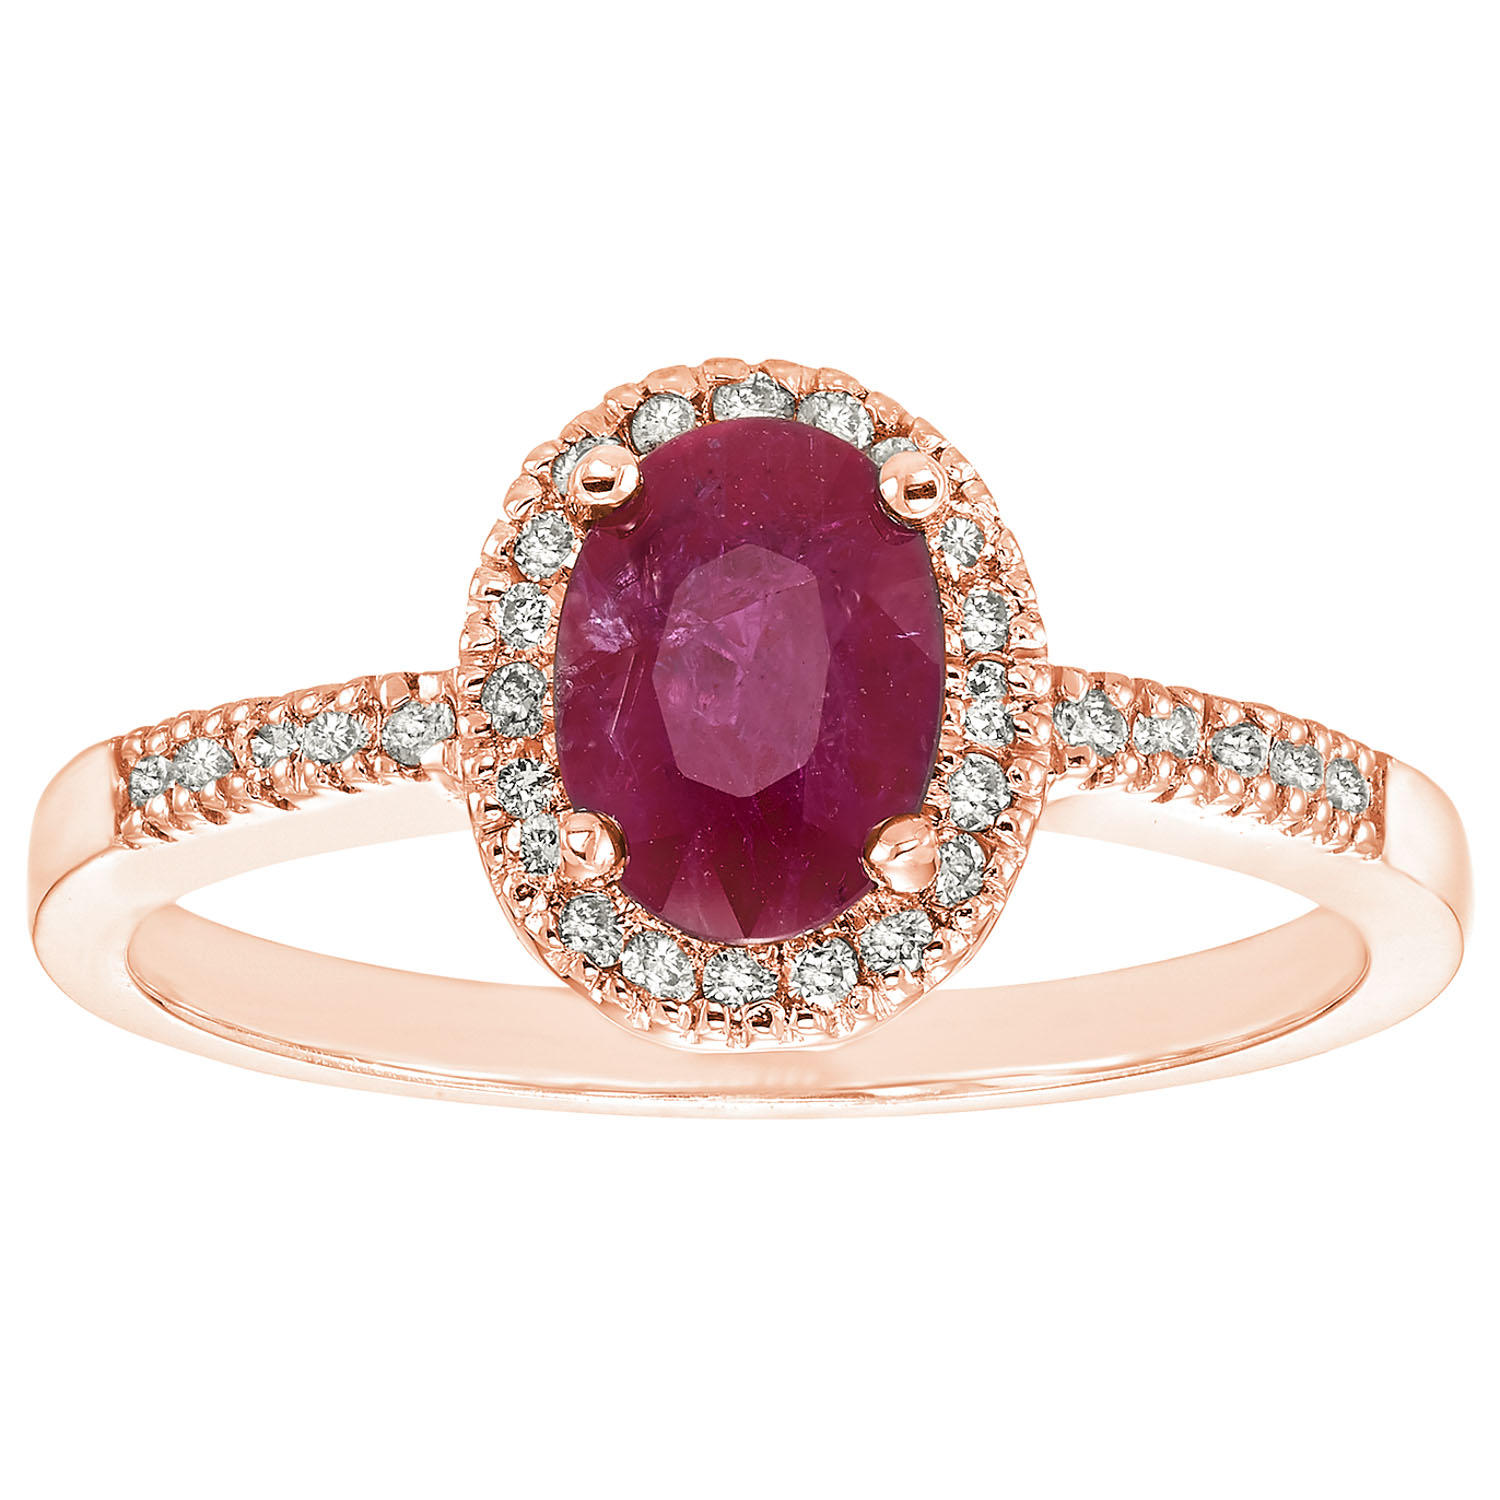 Genuine Ruby and.15 CT. T.W. Diamond Ring in 14k Rose5